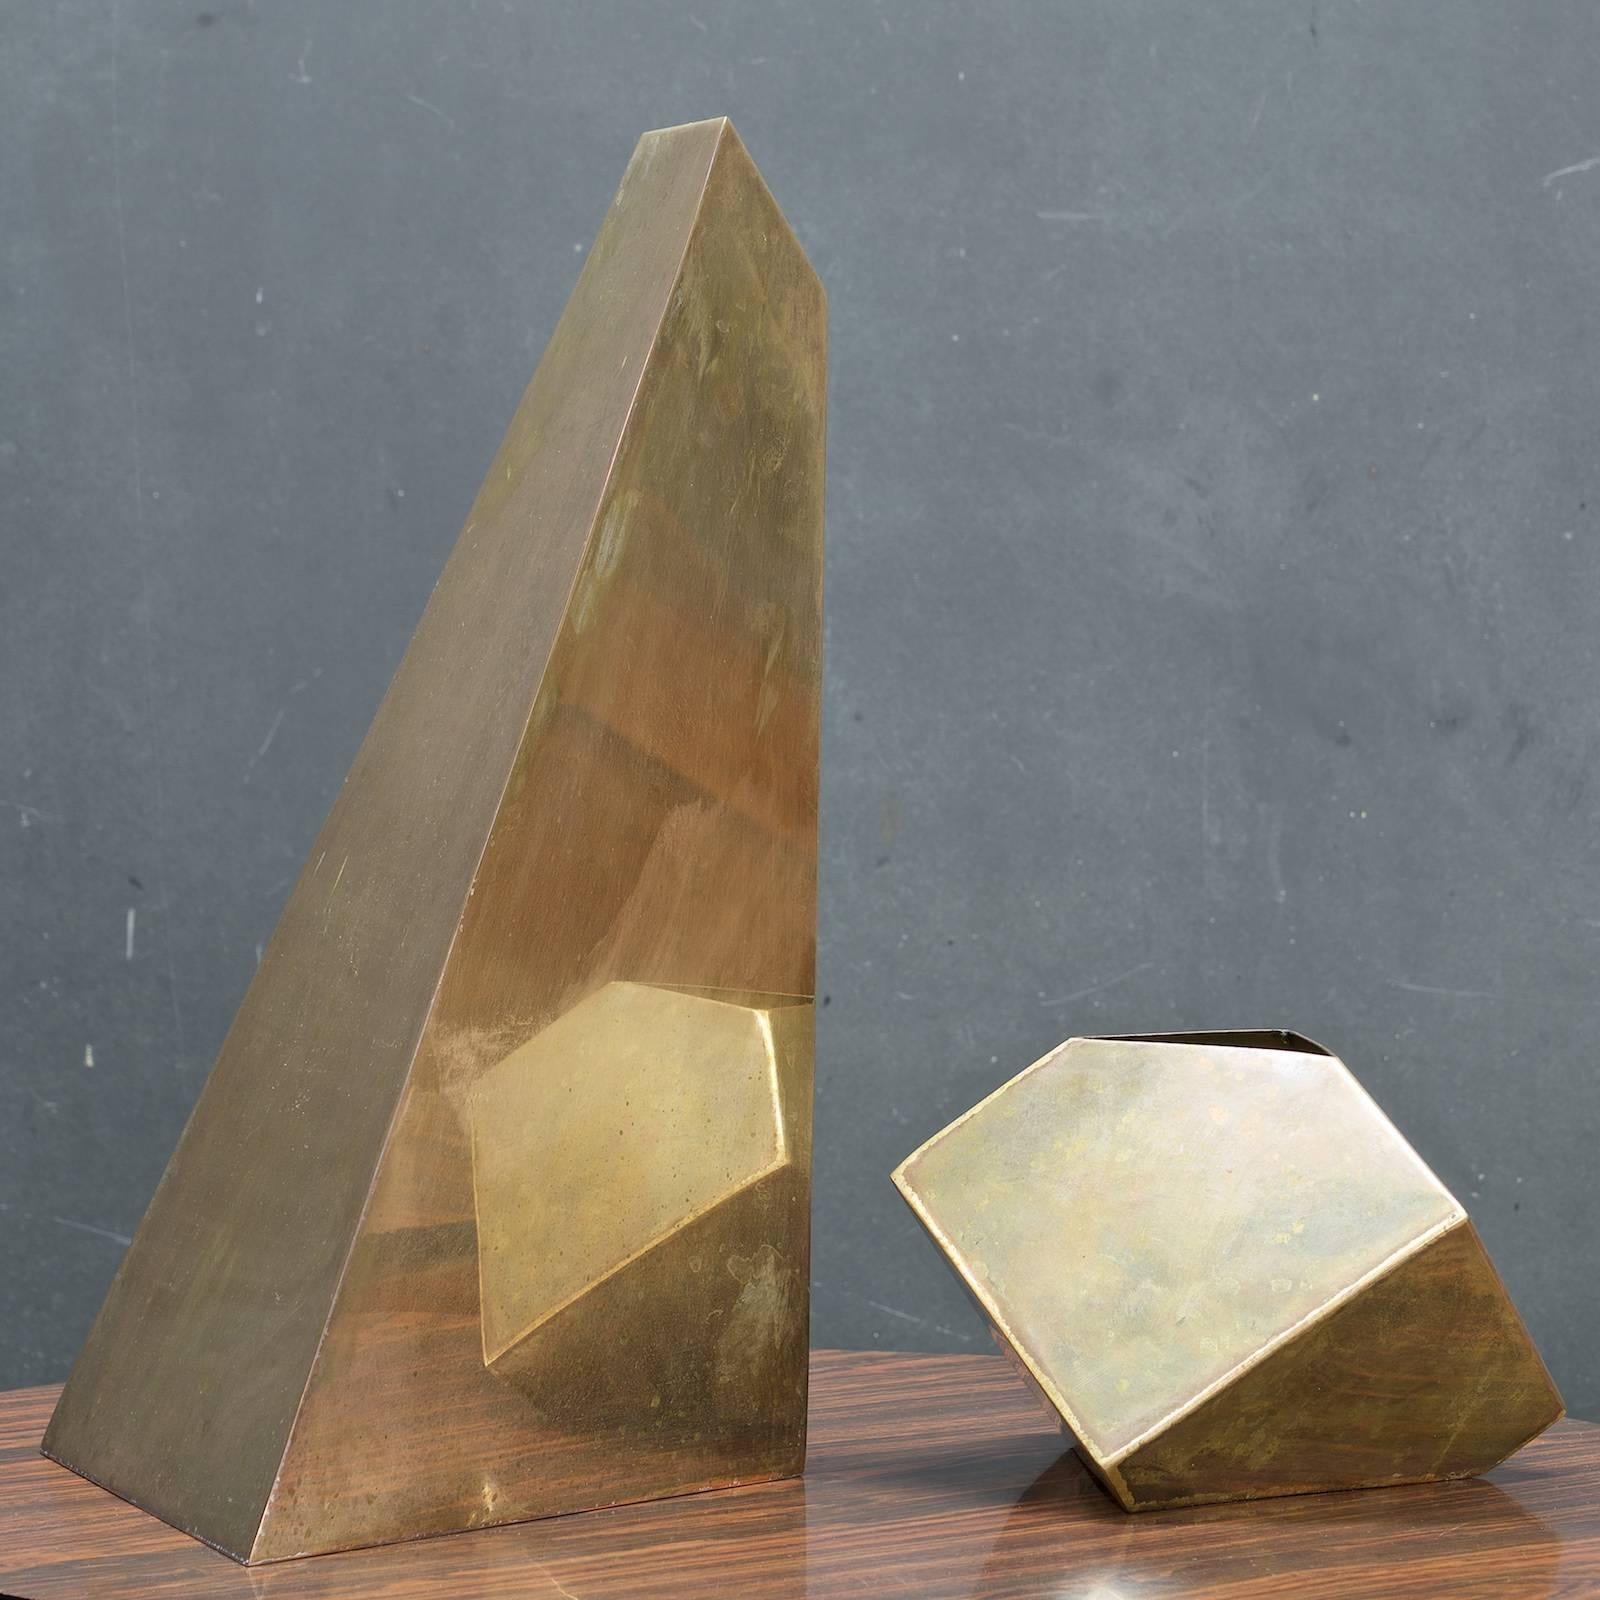 Late Mid-Century tarnished brass geometric polygon decorative obelisk flower vase forms.
Small W 8 x D 7 x H 5.5 in.
Large W 9.25 x D 8.5 x H 16 in.